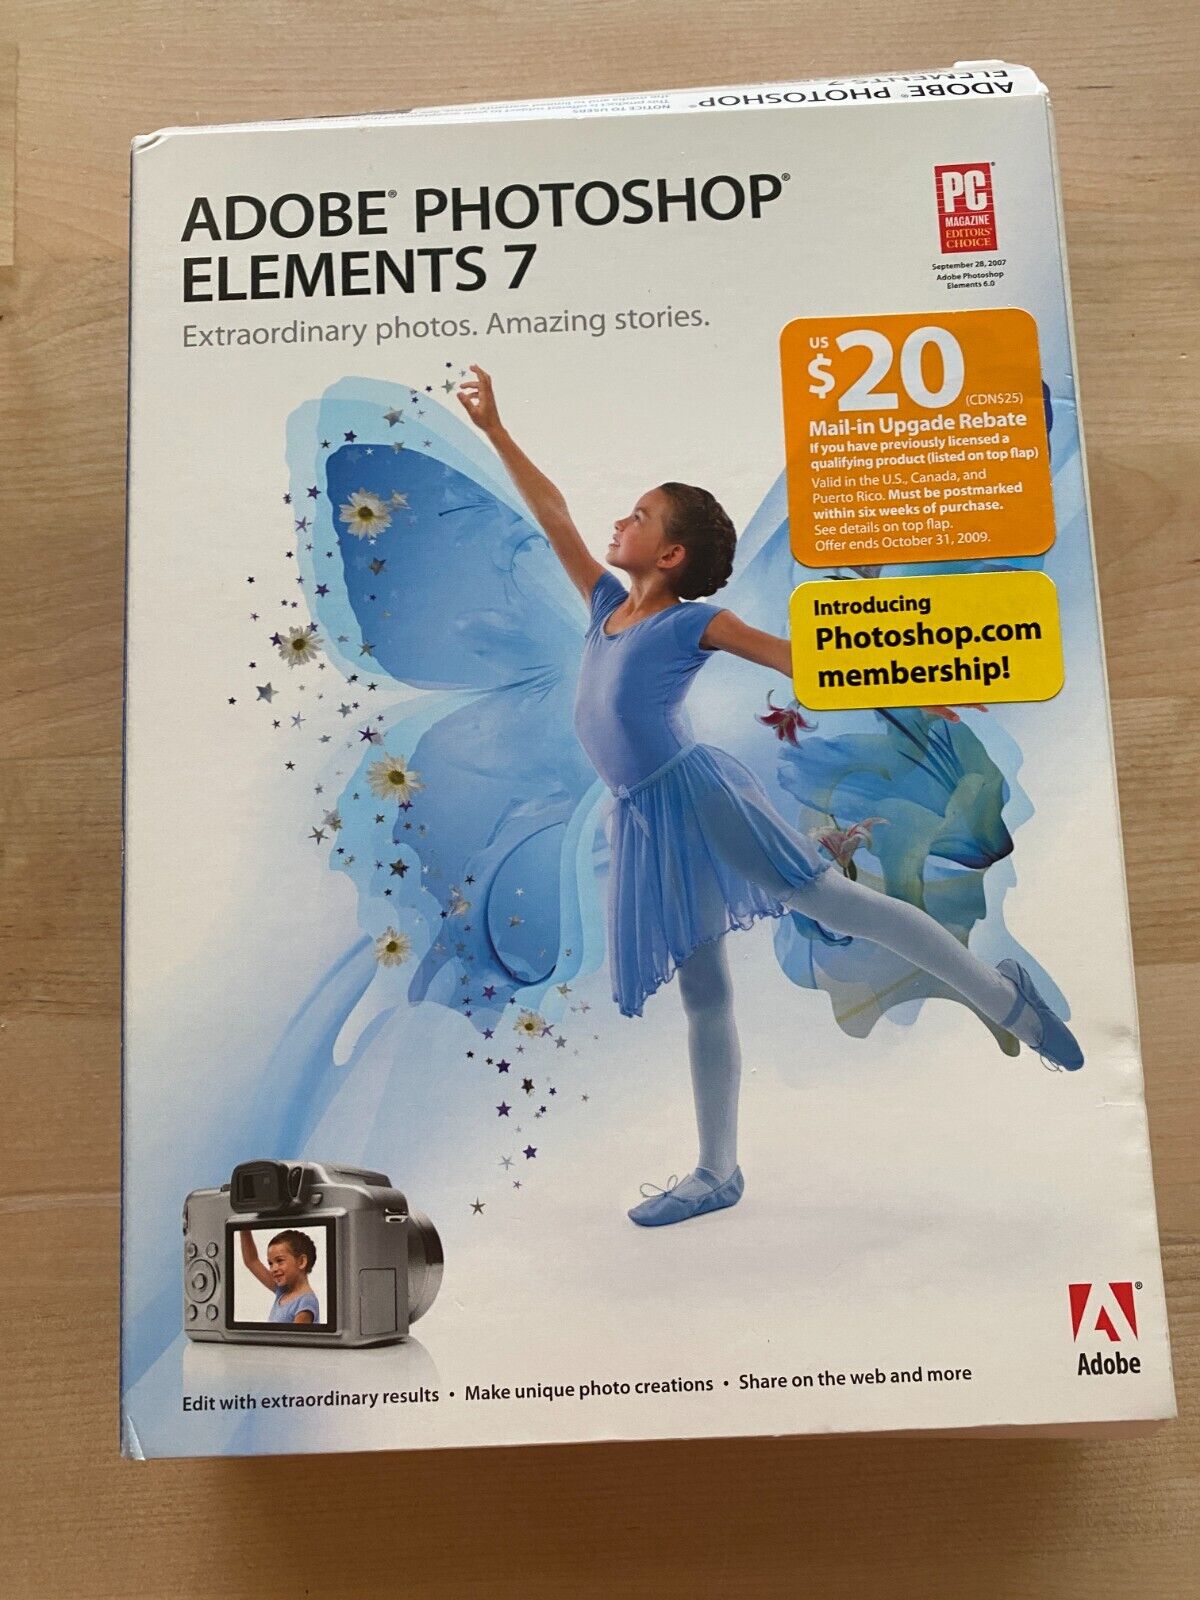 Adobe Photoshop Elements 7 with box and license